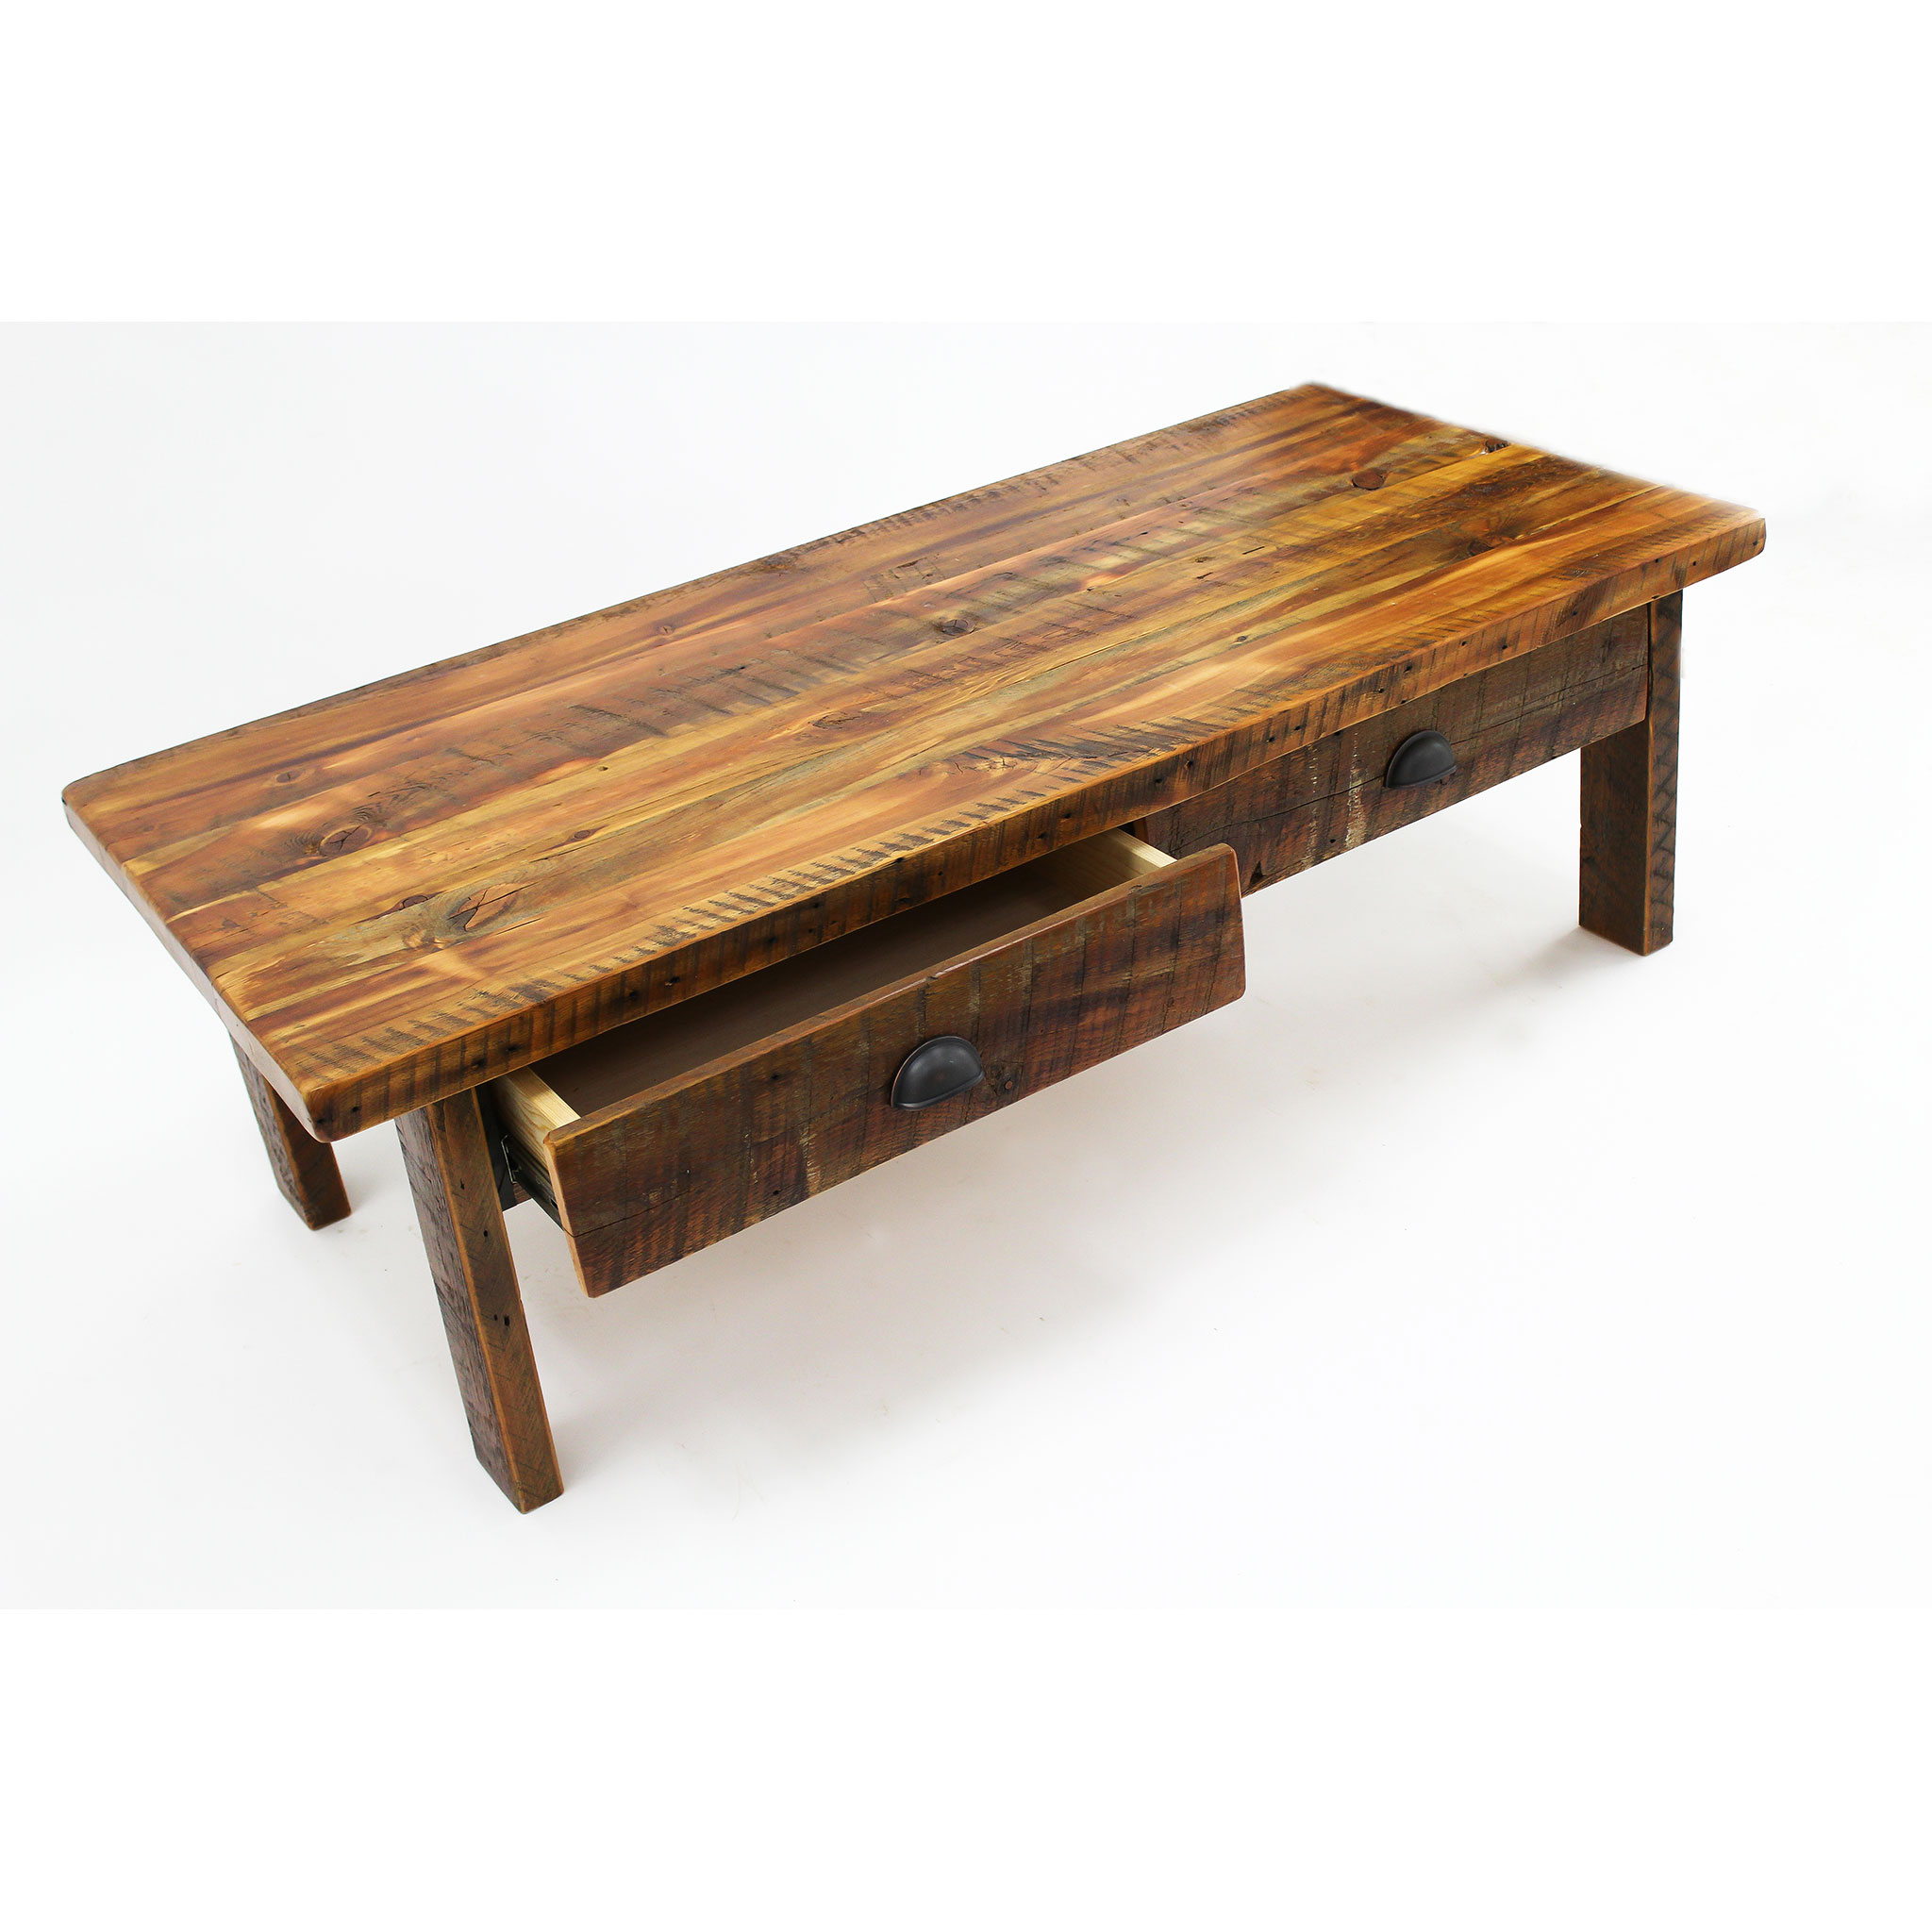 Reclaimed Wood Coffee Table With, Distressed Wood Coffee Table With Drawers